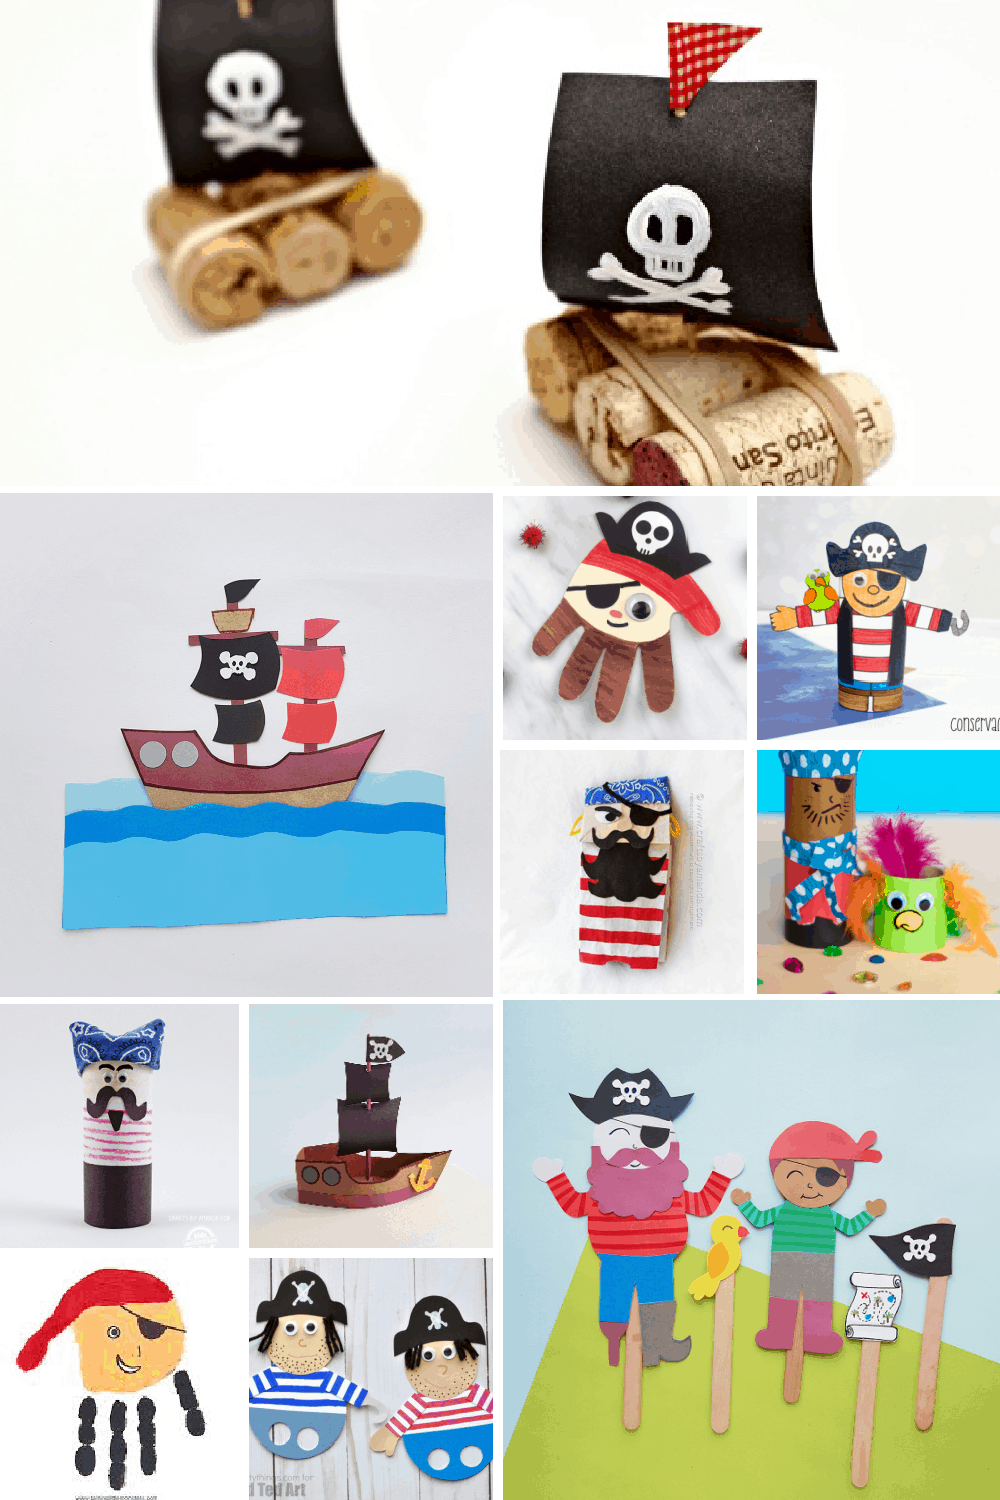 Ahoy Matey!  20 Awesome Pirate Crafts for Kids